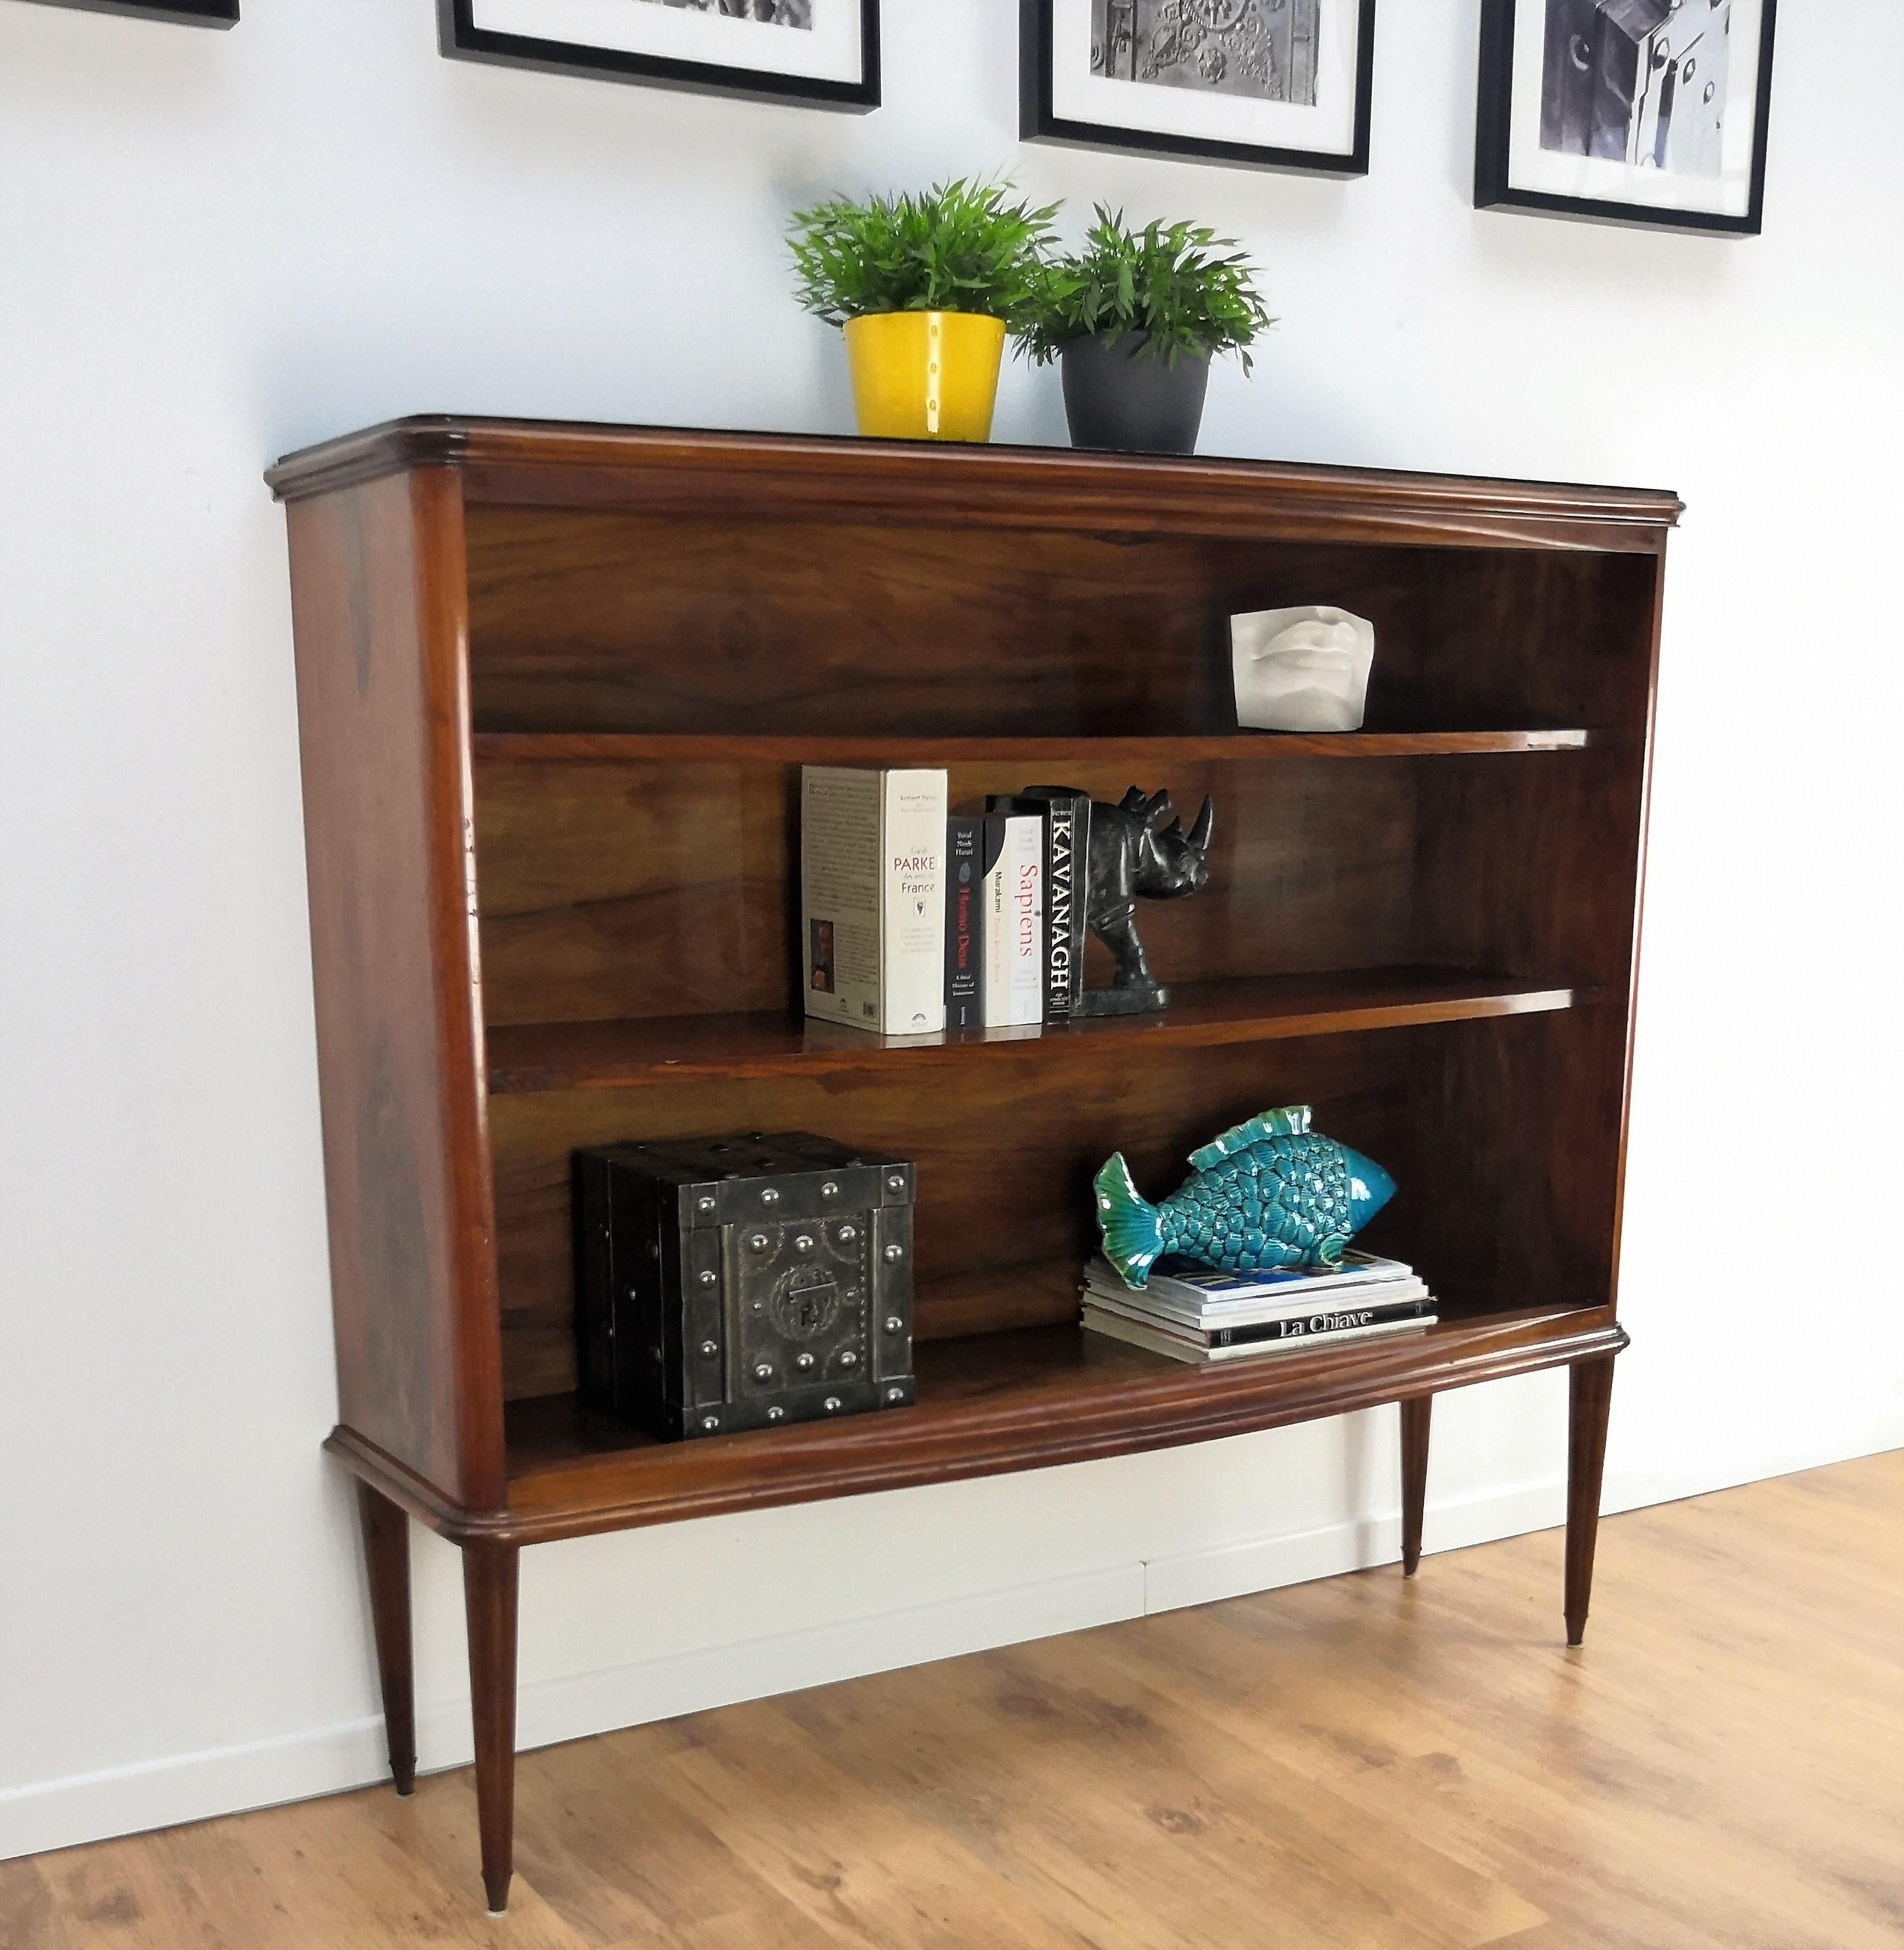 A beautiful Italian Walnut carved three shelves open bookcase, with great details and frames shaped in Victorian, Napoleon III, Louis XV style with Art Deco gilt decorated black glass top and Midcentury Modern accents such as the brass detail on the